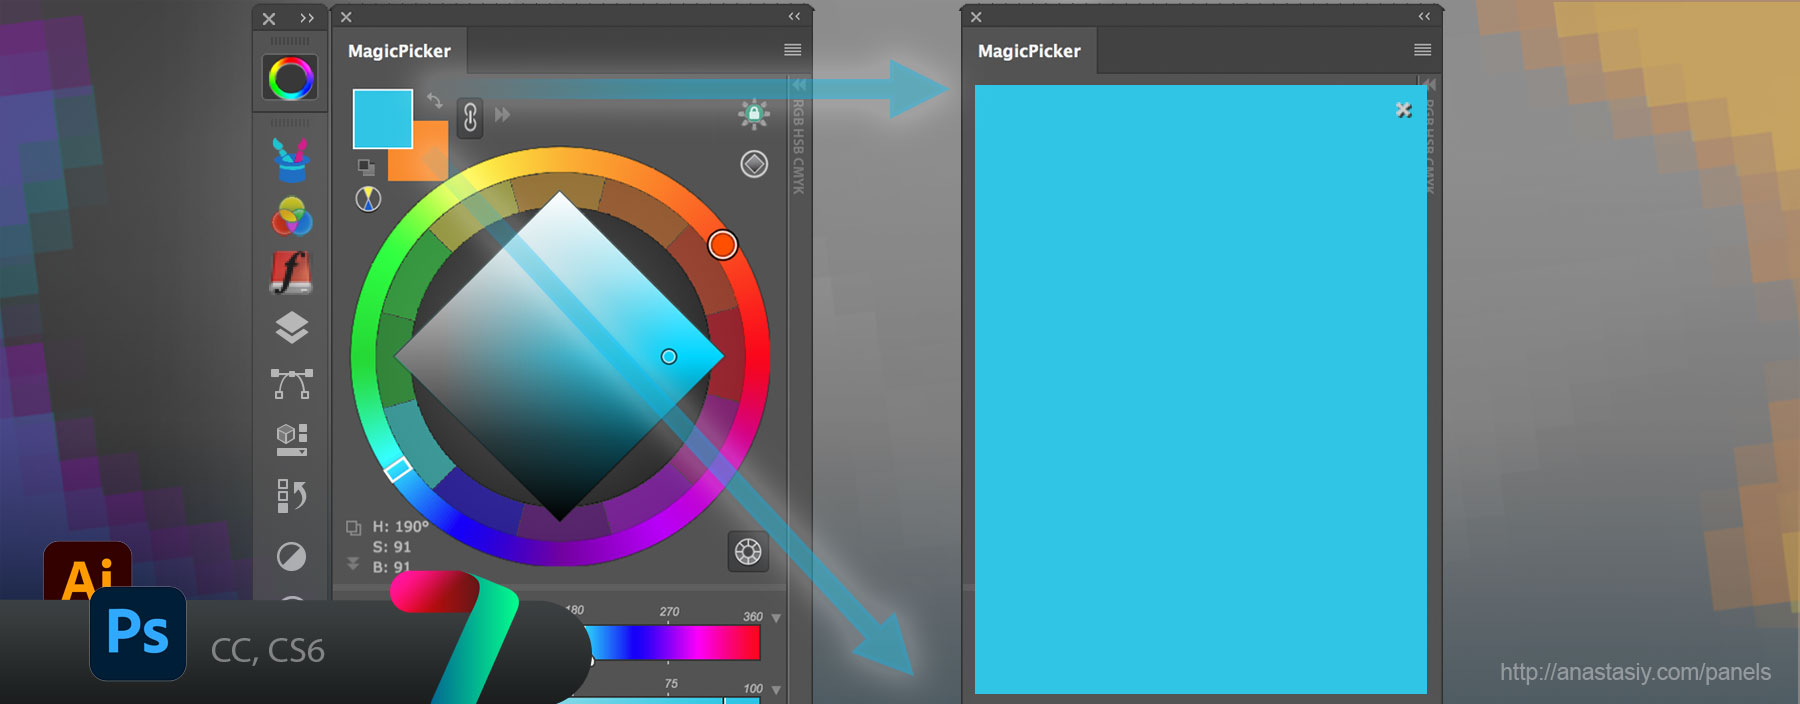 GIANT color preview in Photoshop with magicPicker color wheel panel